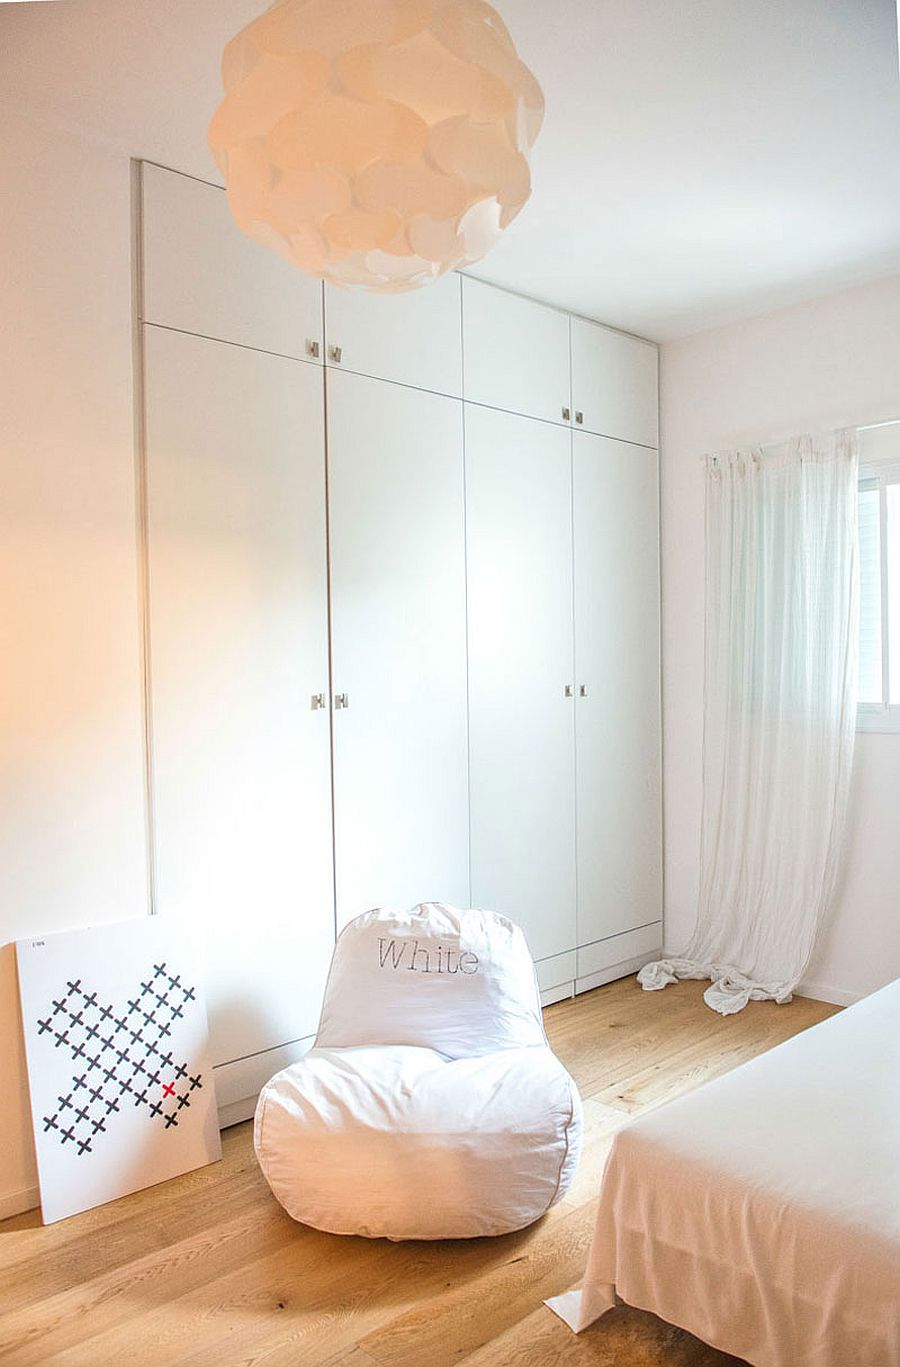 White wardrobes in the bedroom become one with the backdrop